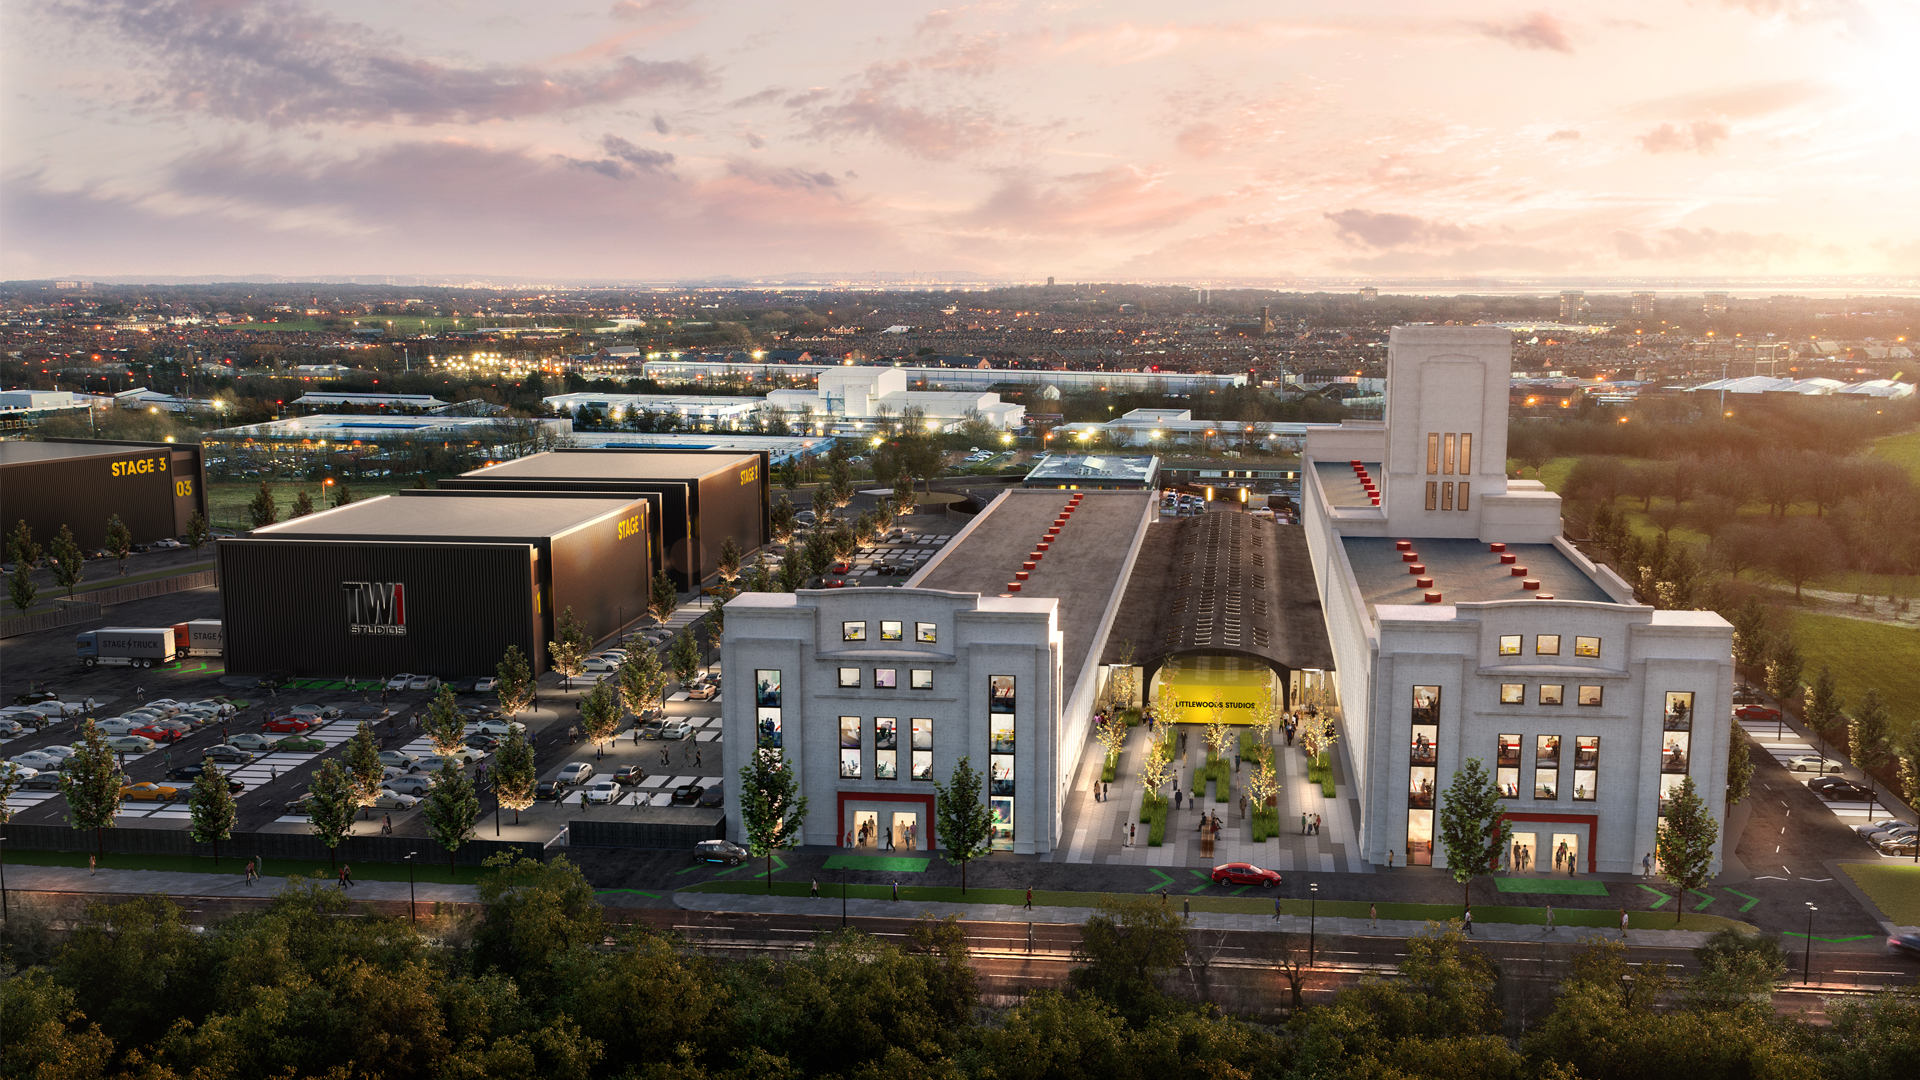 CGI image of the Littlewoods Project film studios buildings